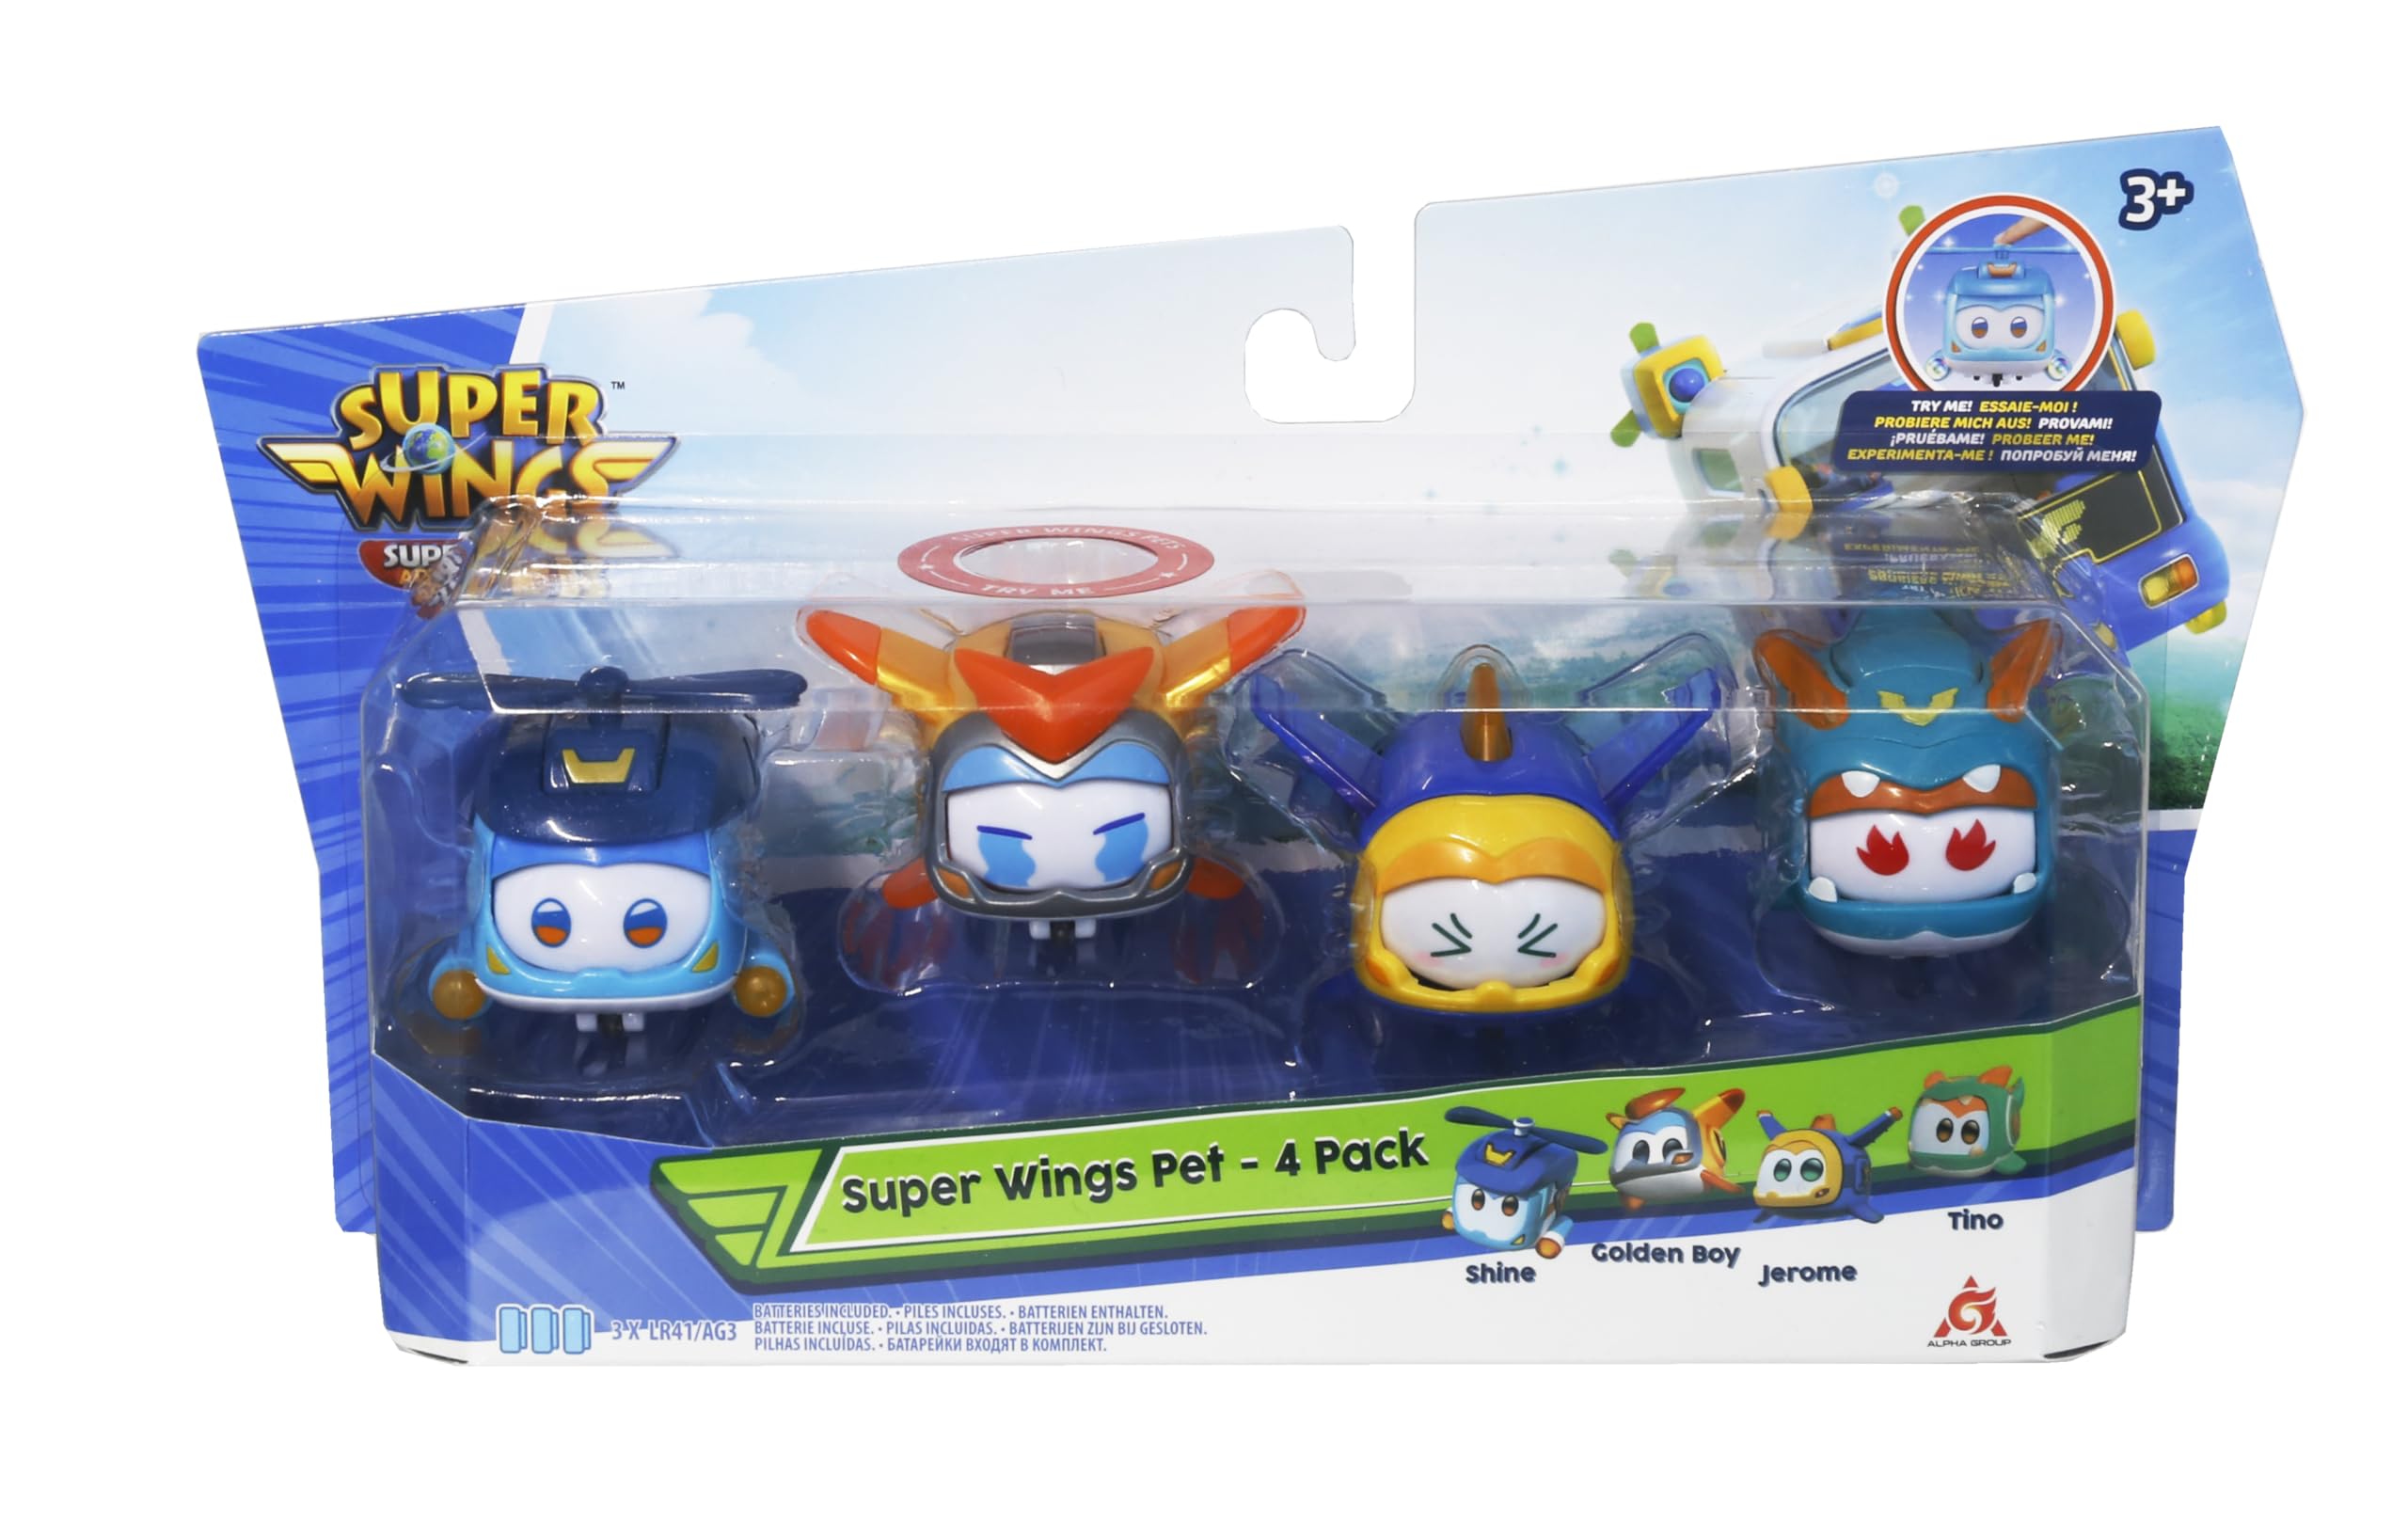 Super Wings Super Pets 4-Pack Collection Super Pets Jerome, Golden Boy, Shine, Tino, Vehicle Action Figure, with Light Effect and Switch Emotion Expressions, Gifts for Kids Aged 3 and Up